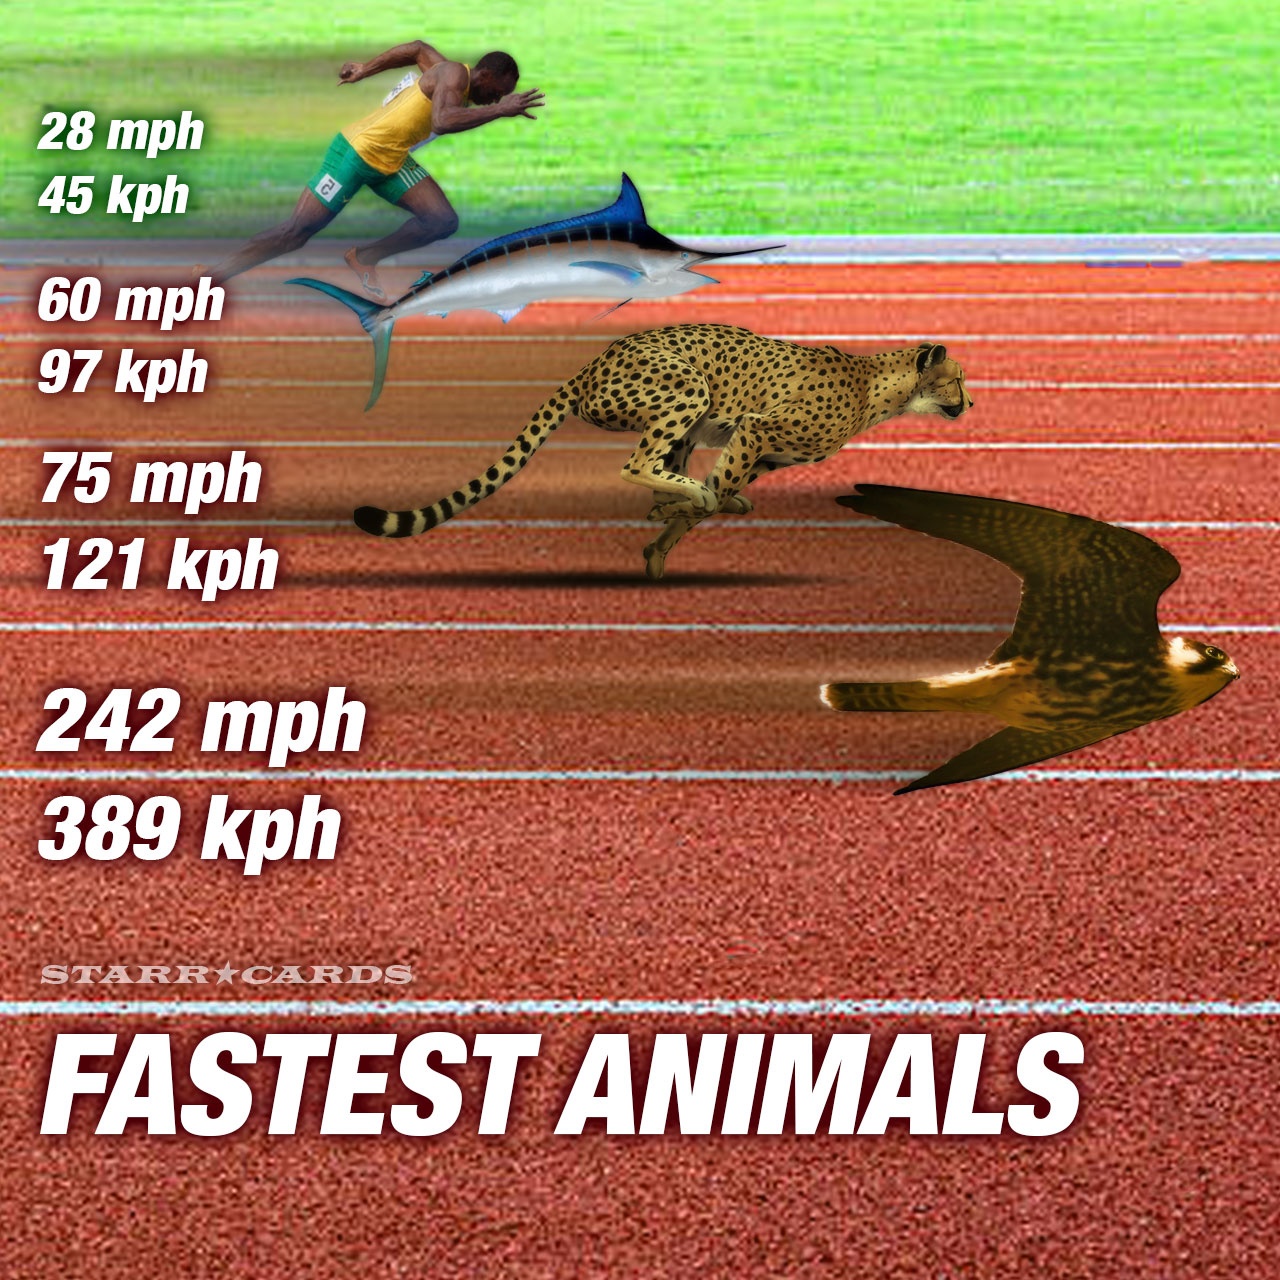 Is there a bird faster than a cheetah?